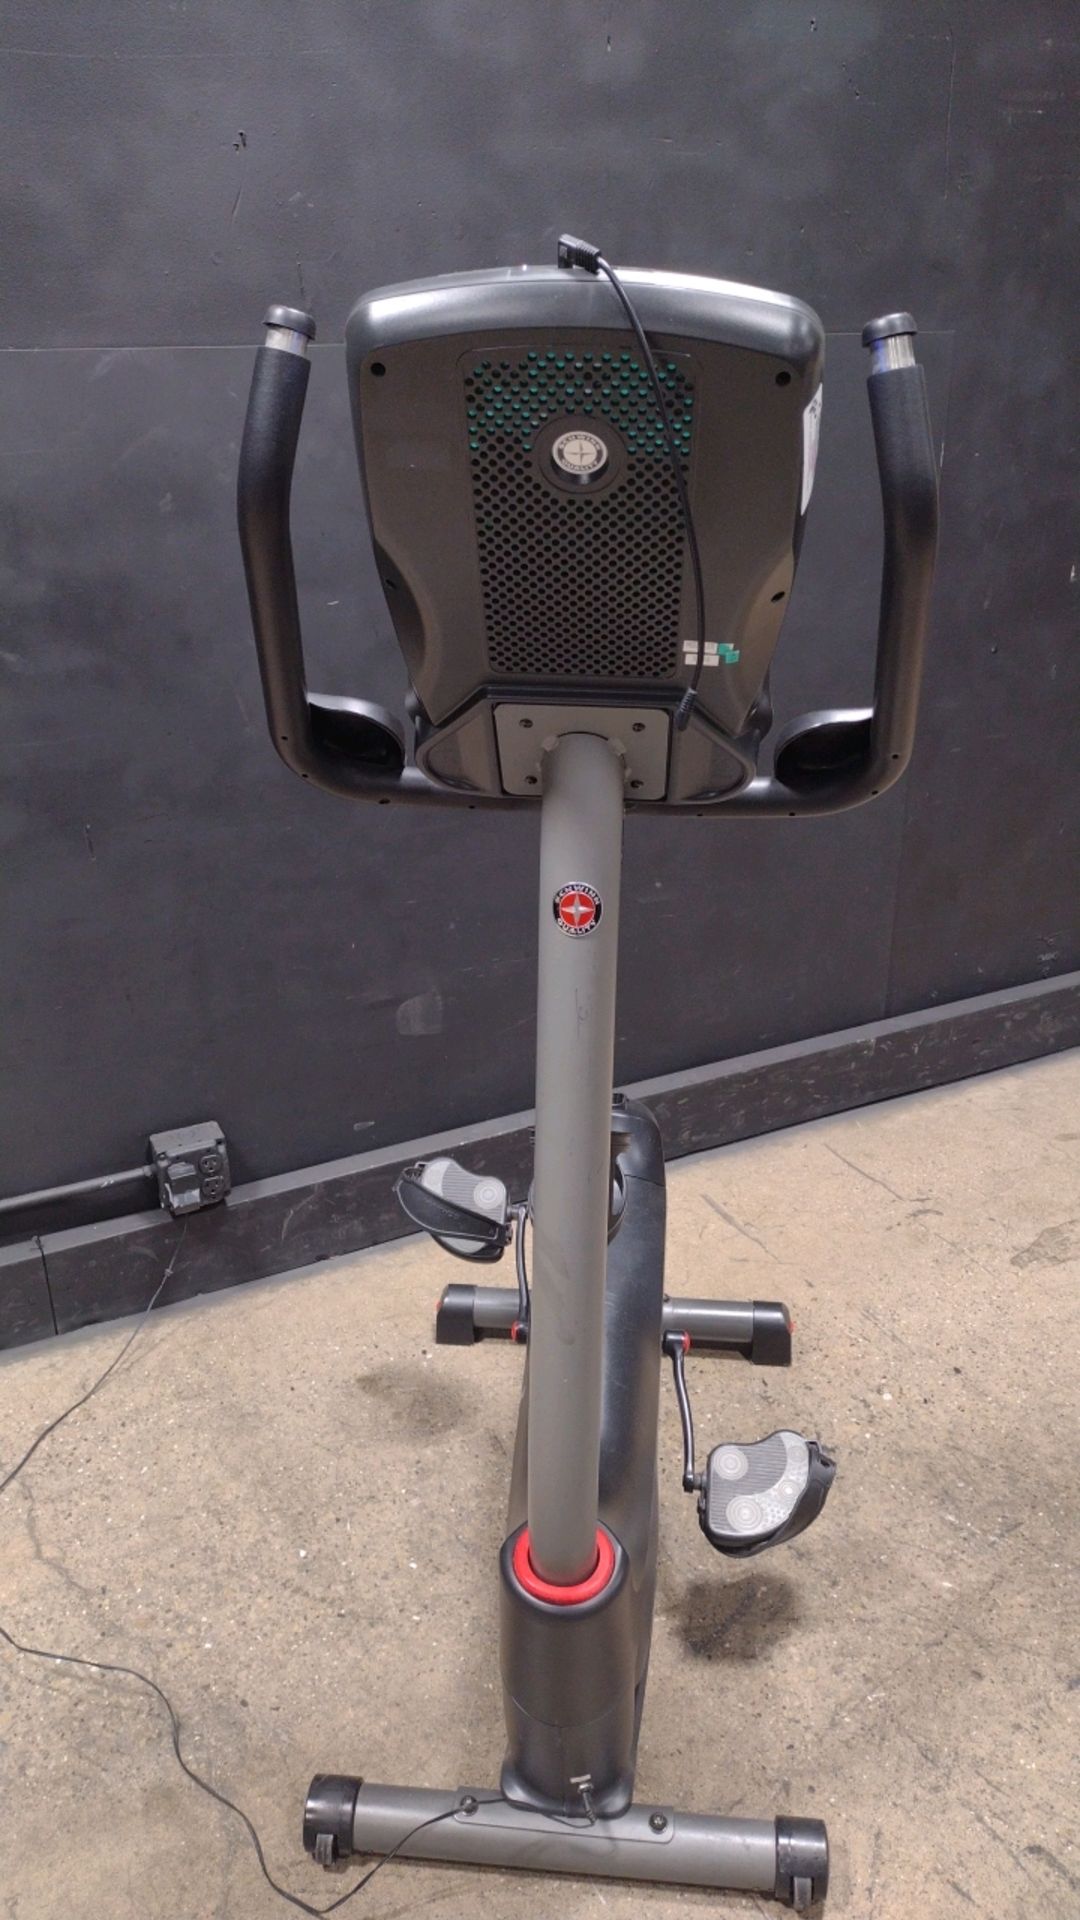 SCHWINN 170 EXERCISE BIKE (LOCATED AT 3325 MOUNT PROSPECT ROAD, FRANKLIN PARK, IL, 60131) - Image 3 of 3